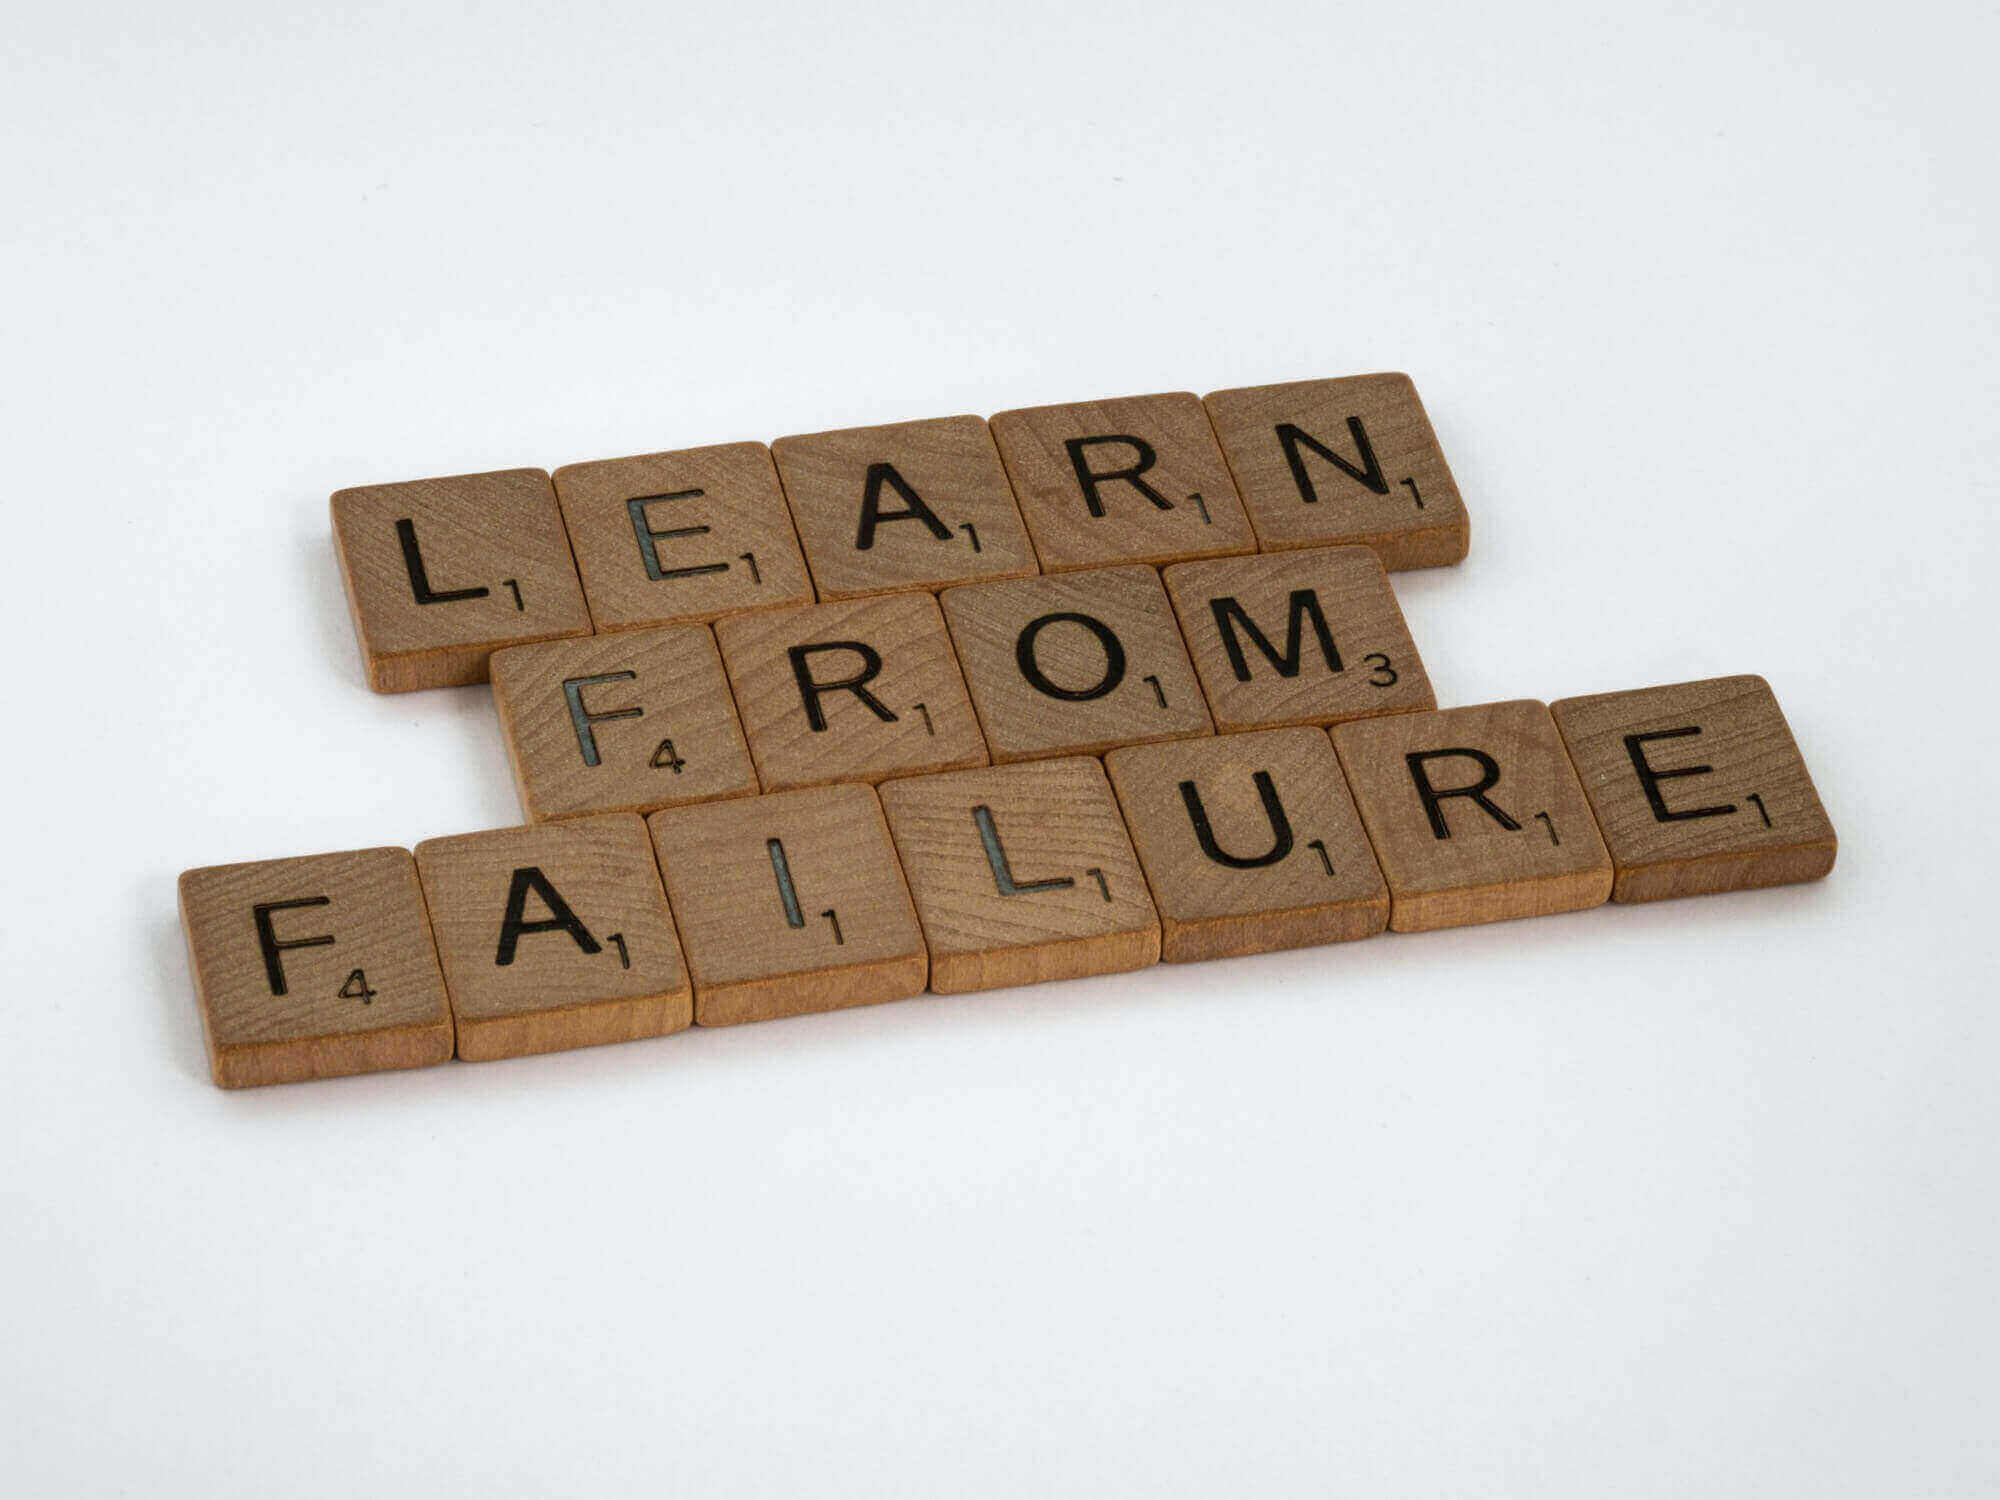 Learn from failure